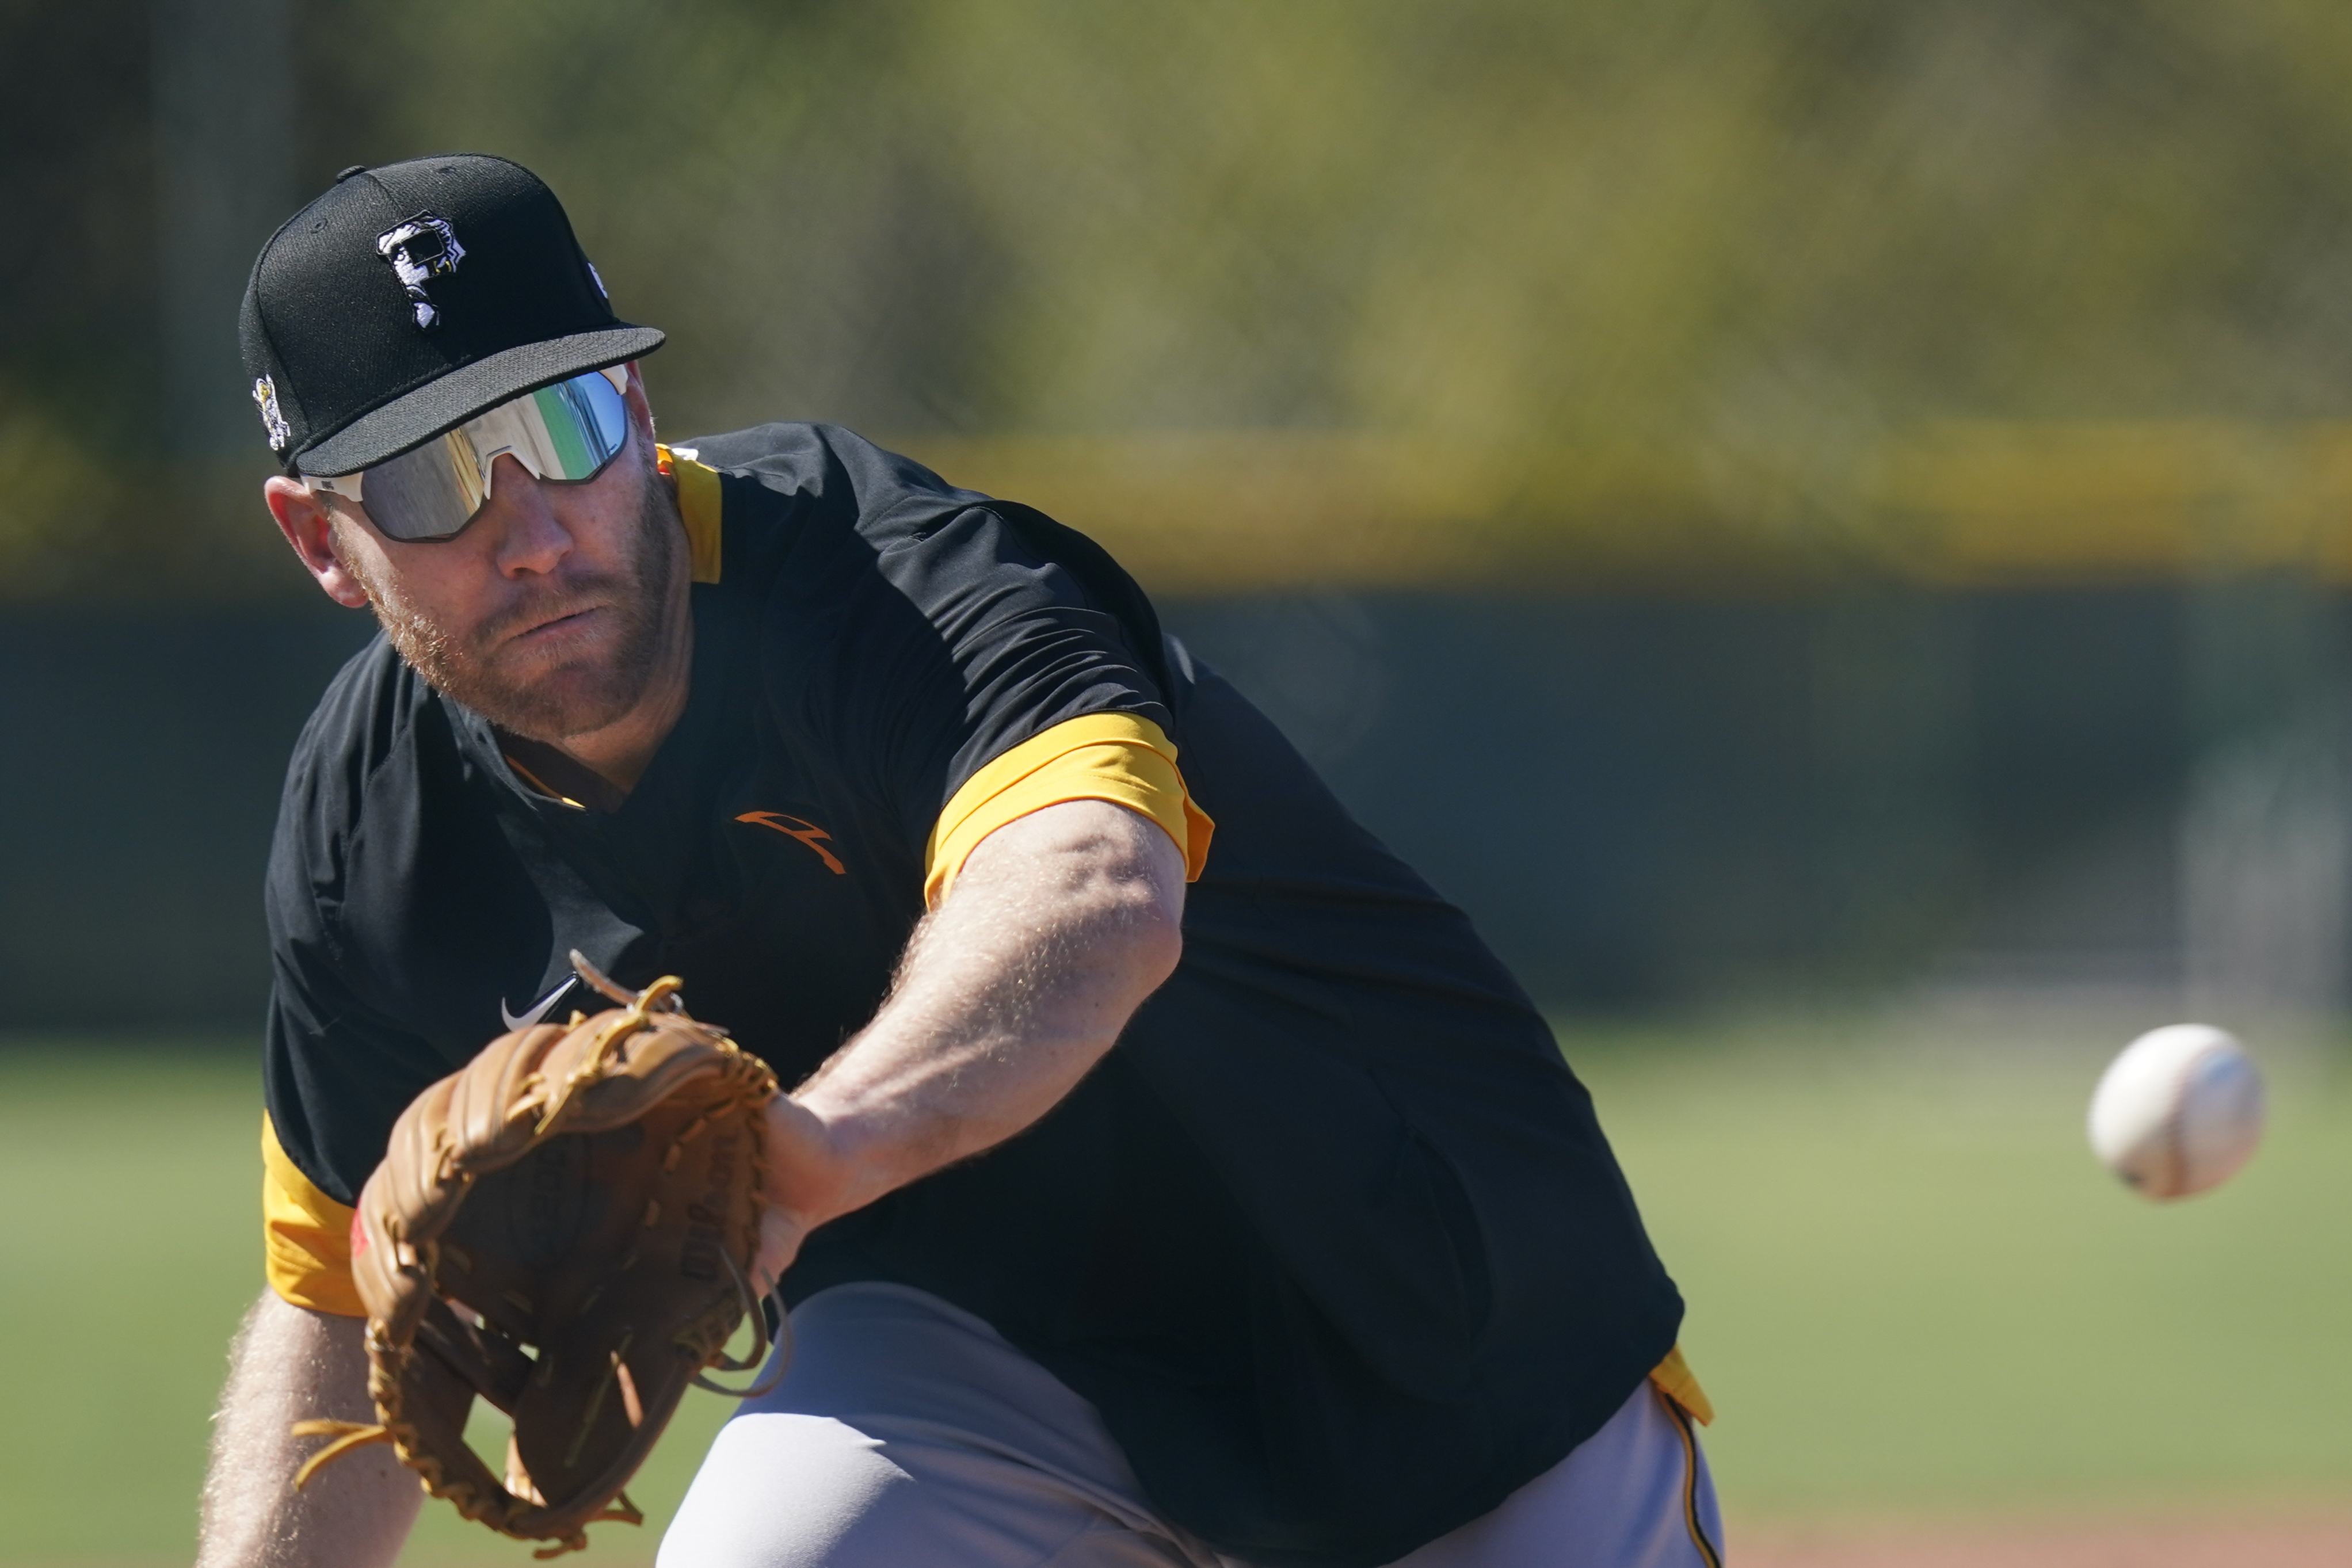 Pirates sign Todd Frazier to minor-league contract